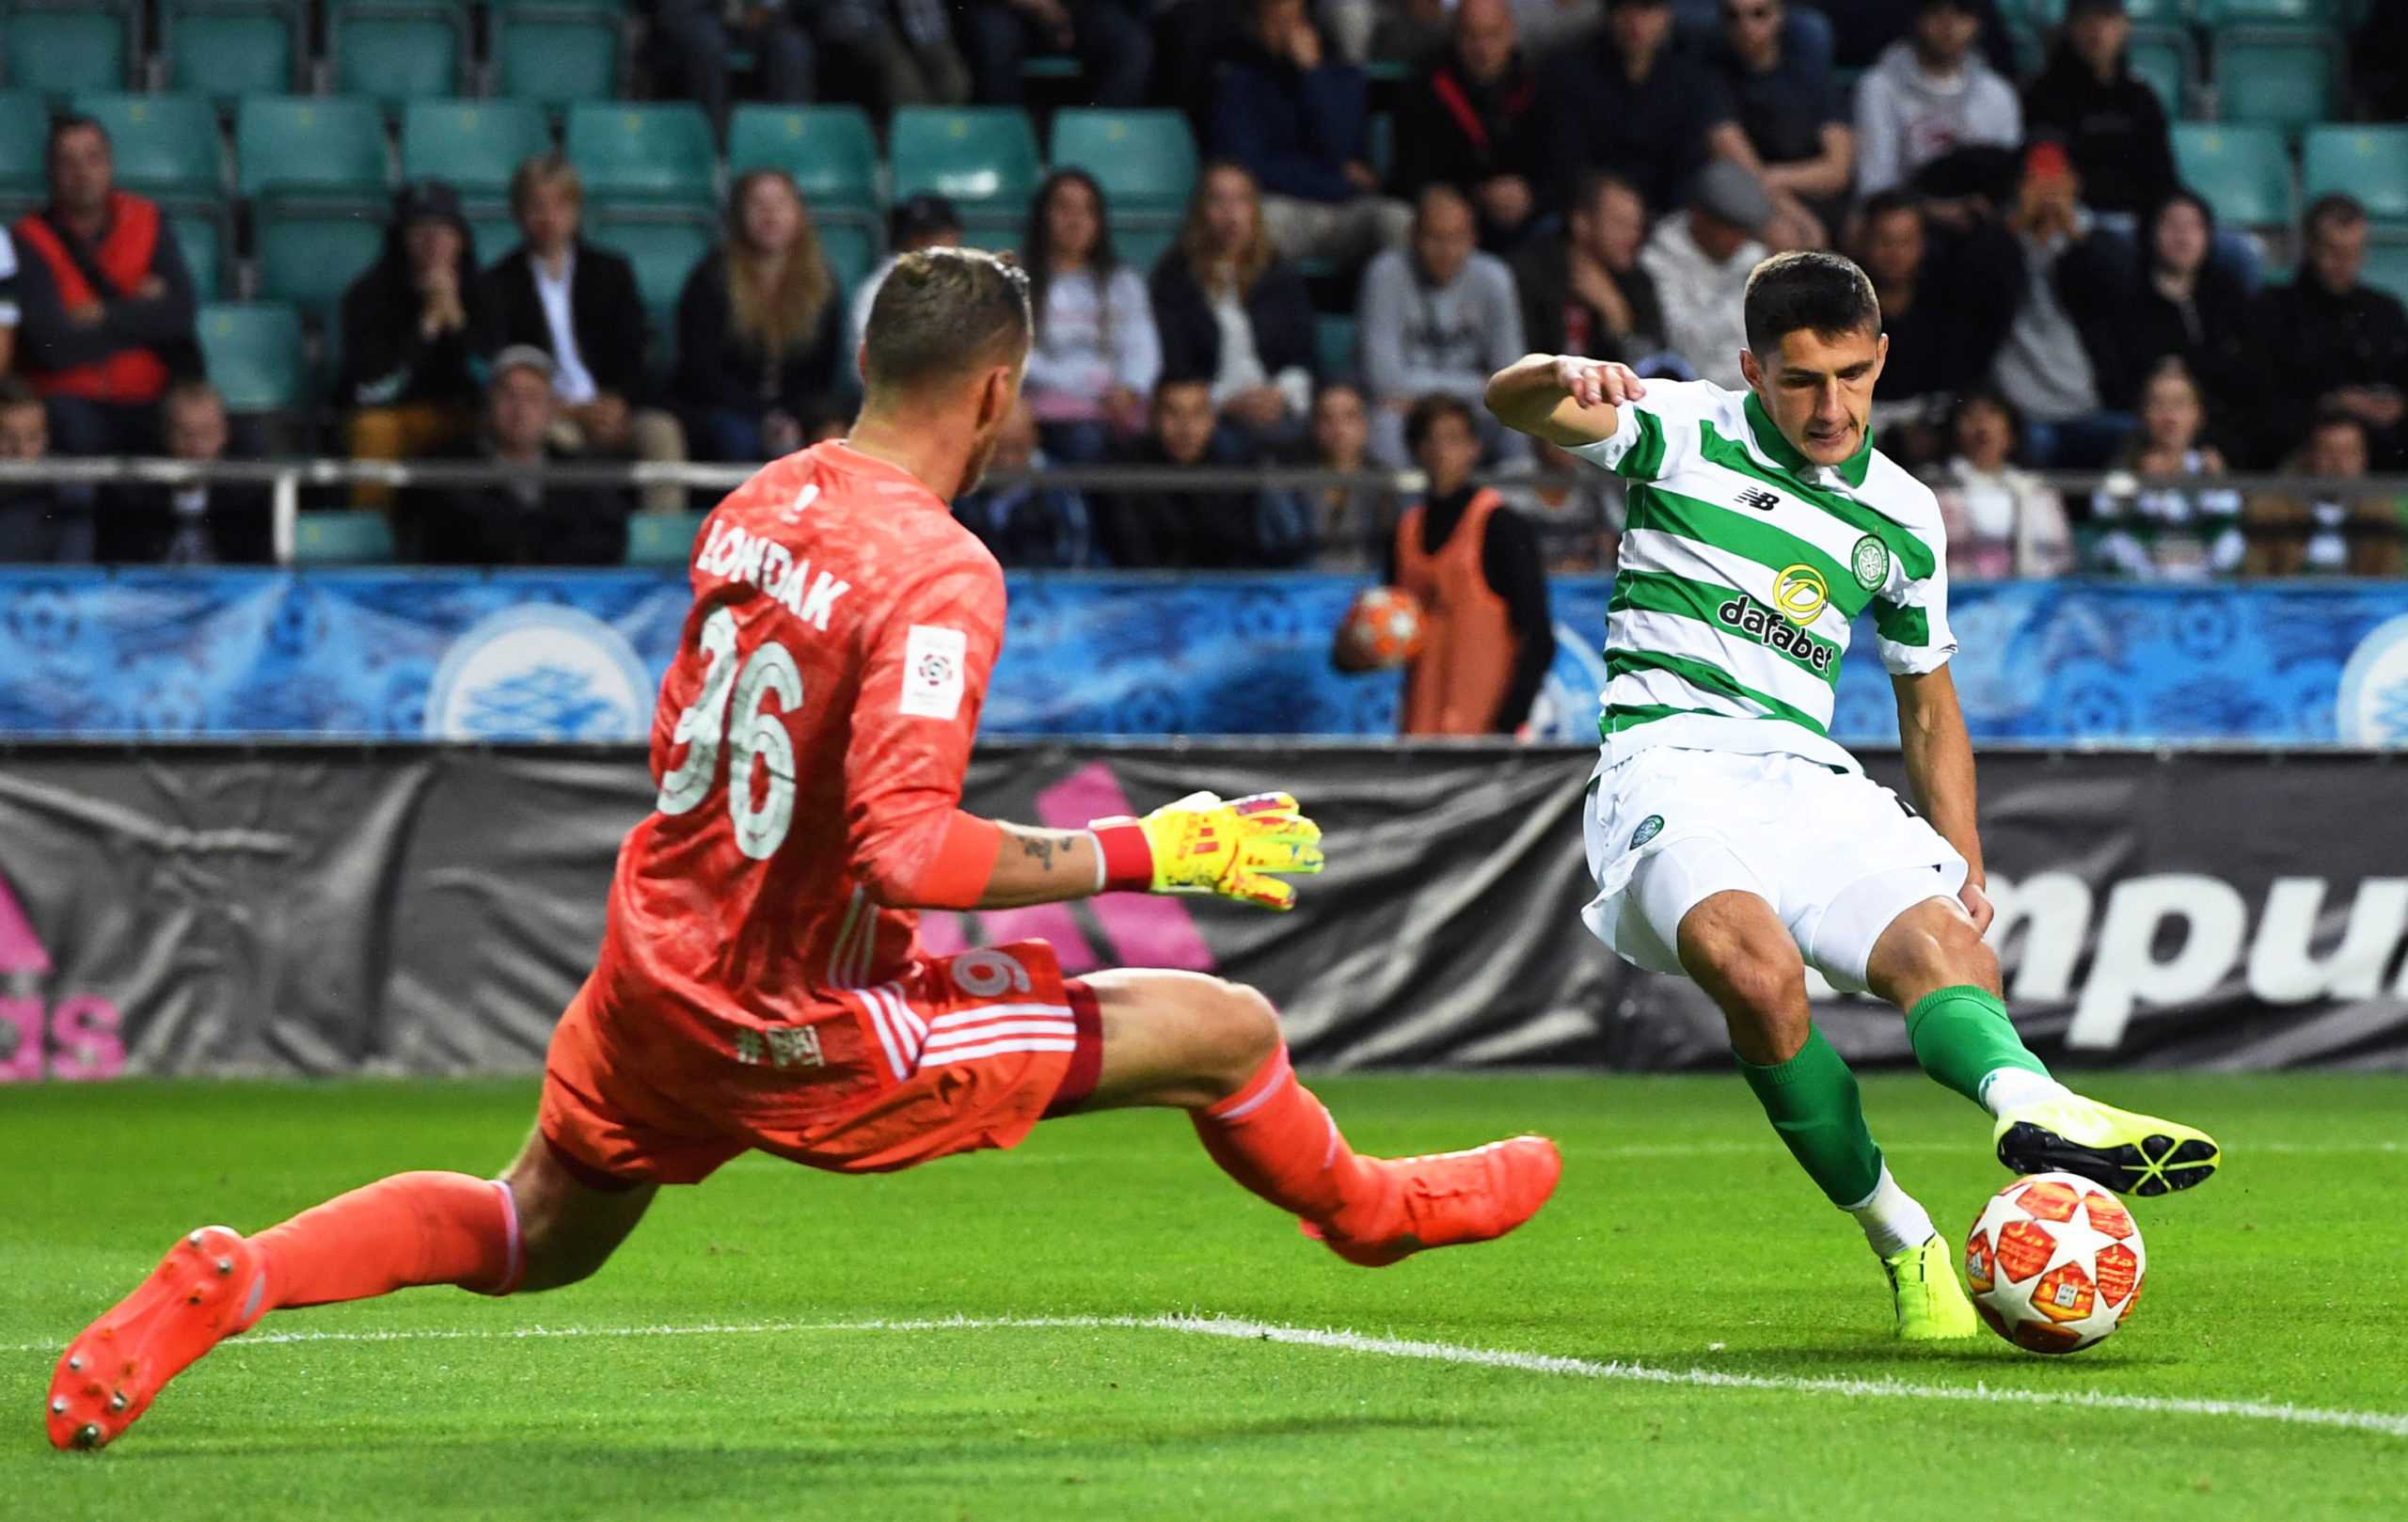 Marian Shved wants his Celtic future solved within the next month